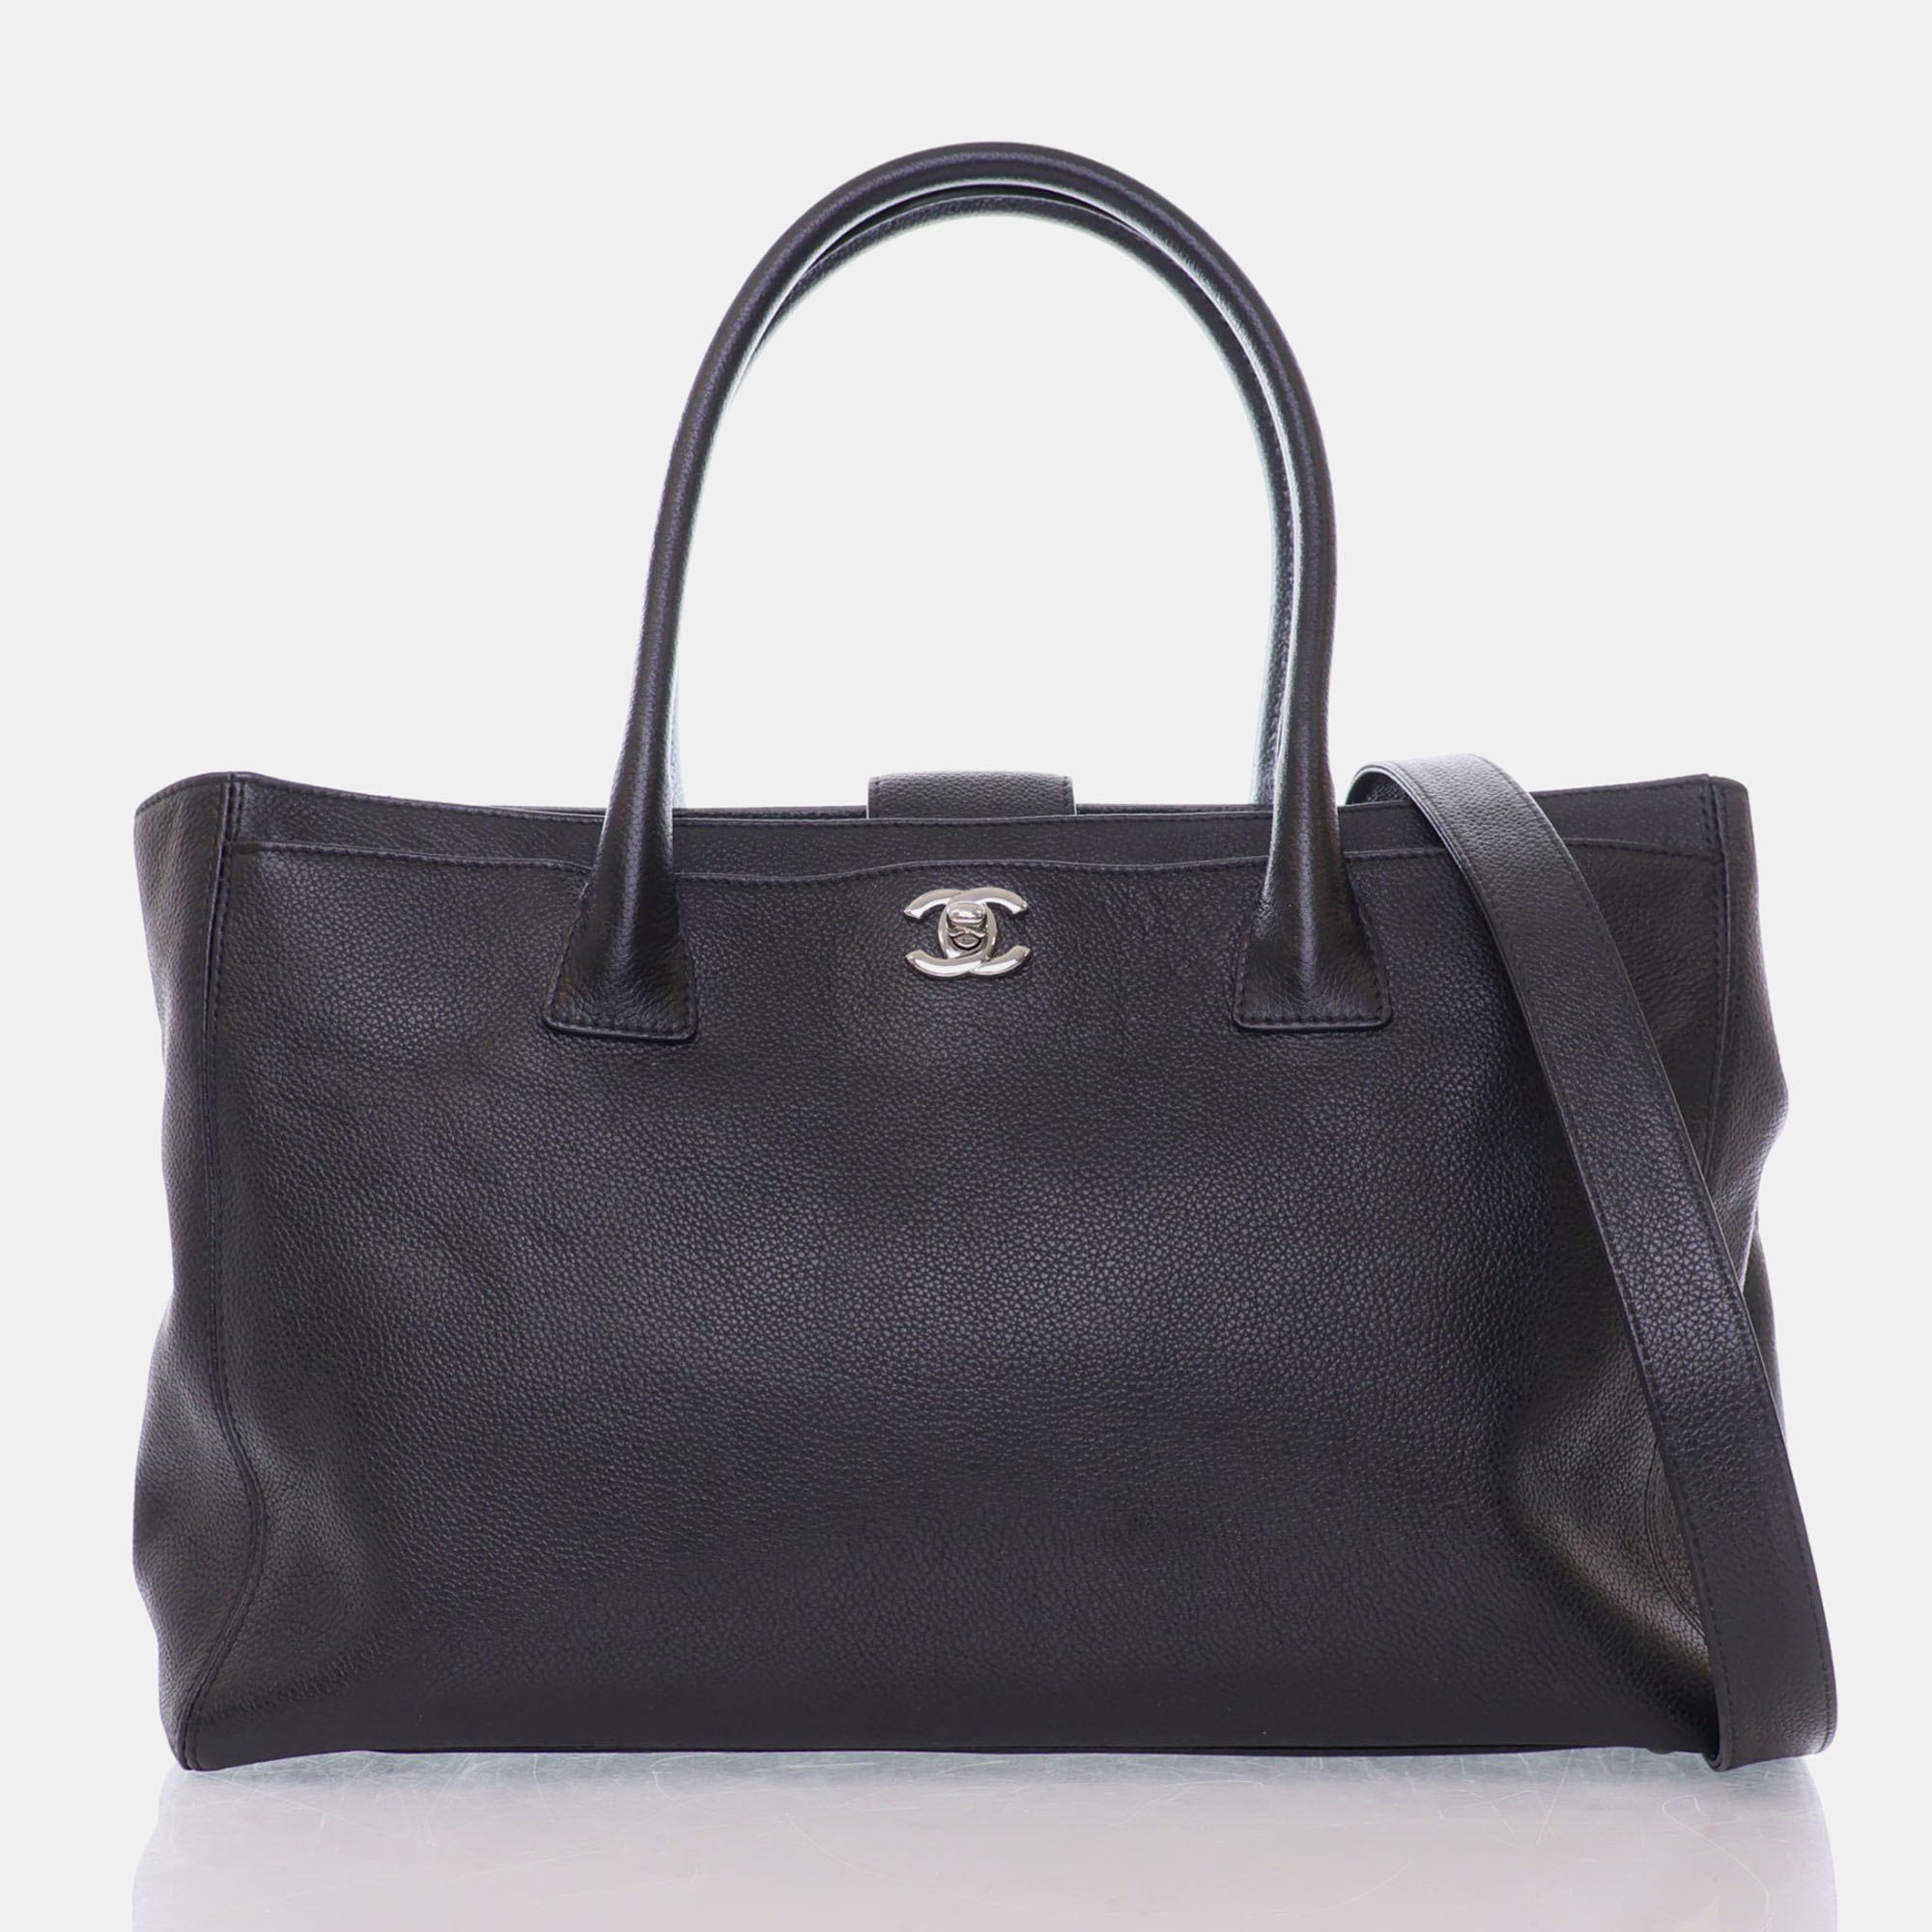 Pre-owned Chanel Black Calfskin Executive Cerf Tote Bag